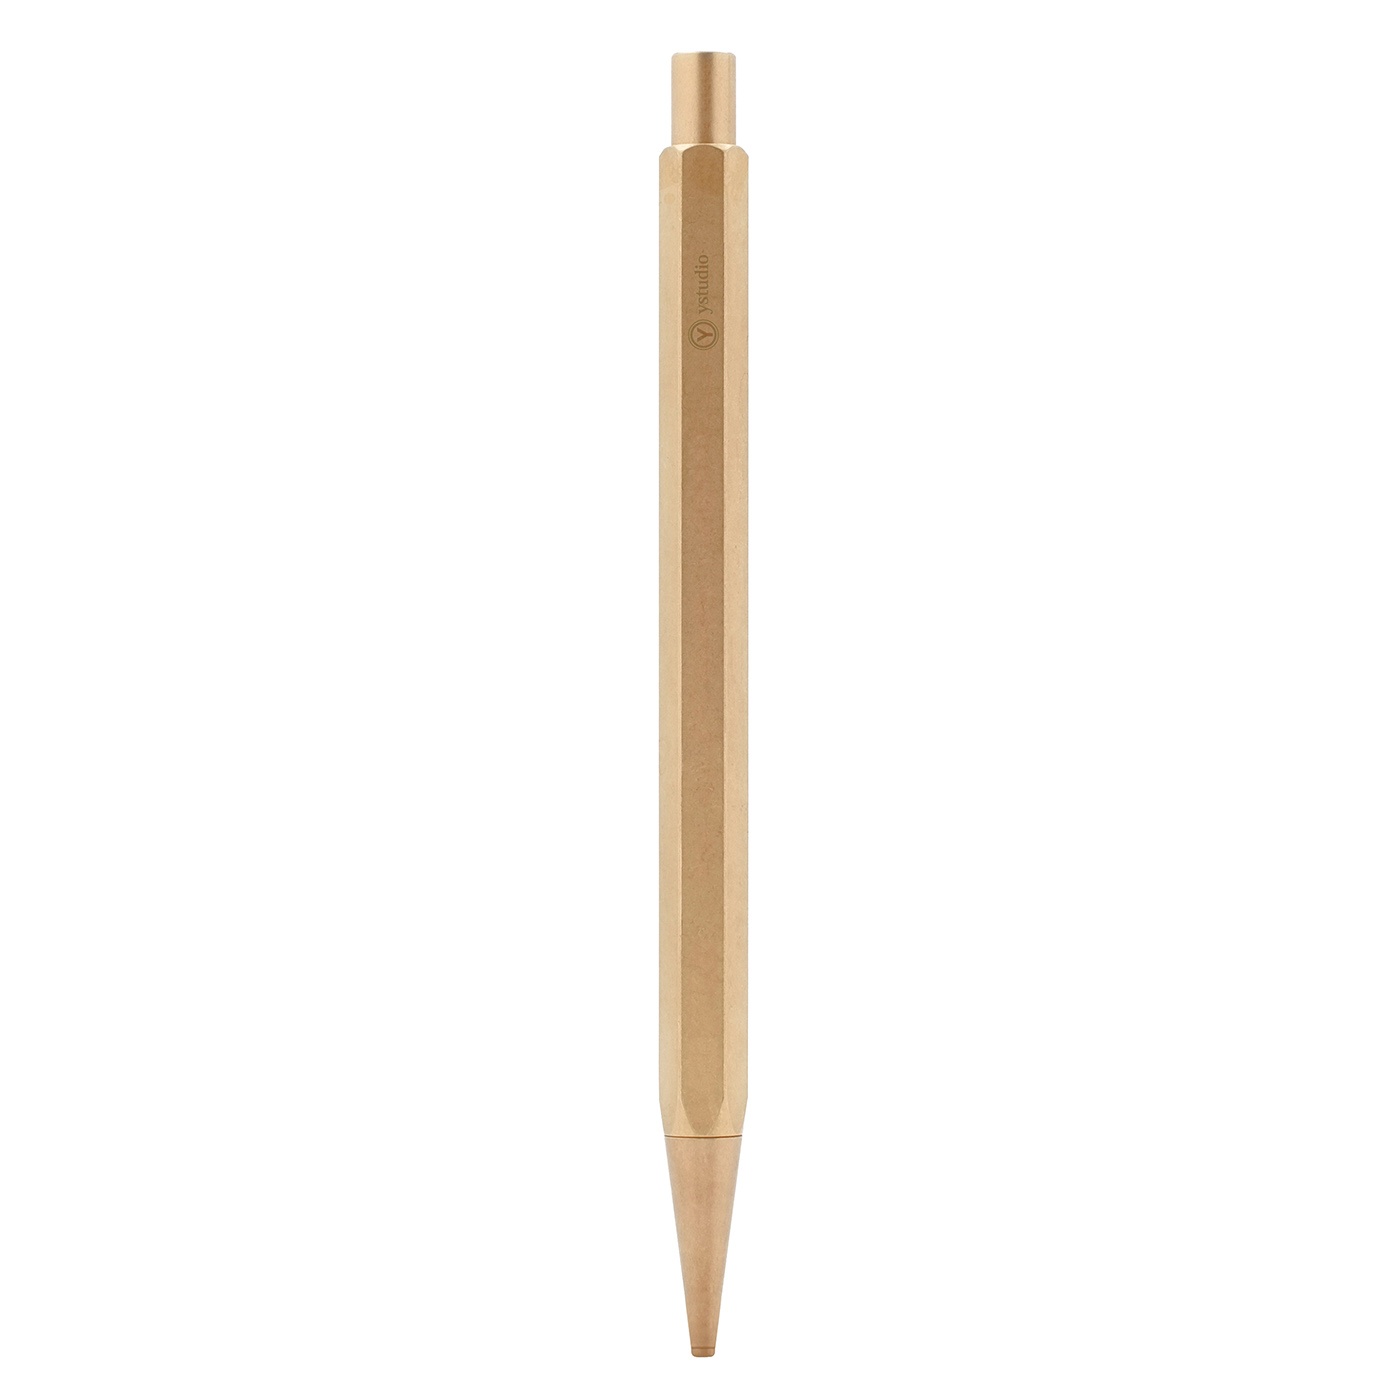 Classic Drawing pencil 2 mm i gruppen Penner / Fine Writing / Gavepenner hos Pen Store (101378)